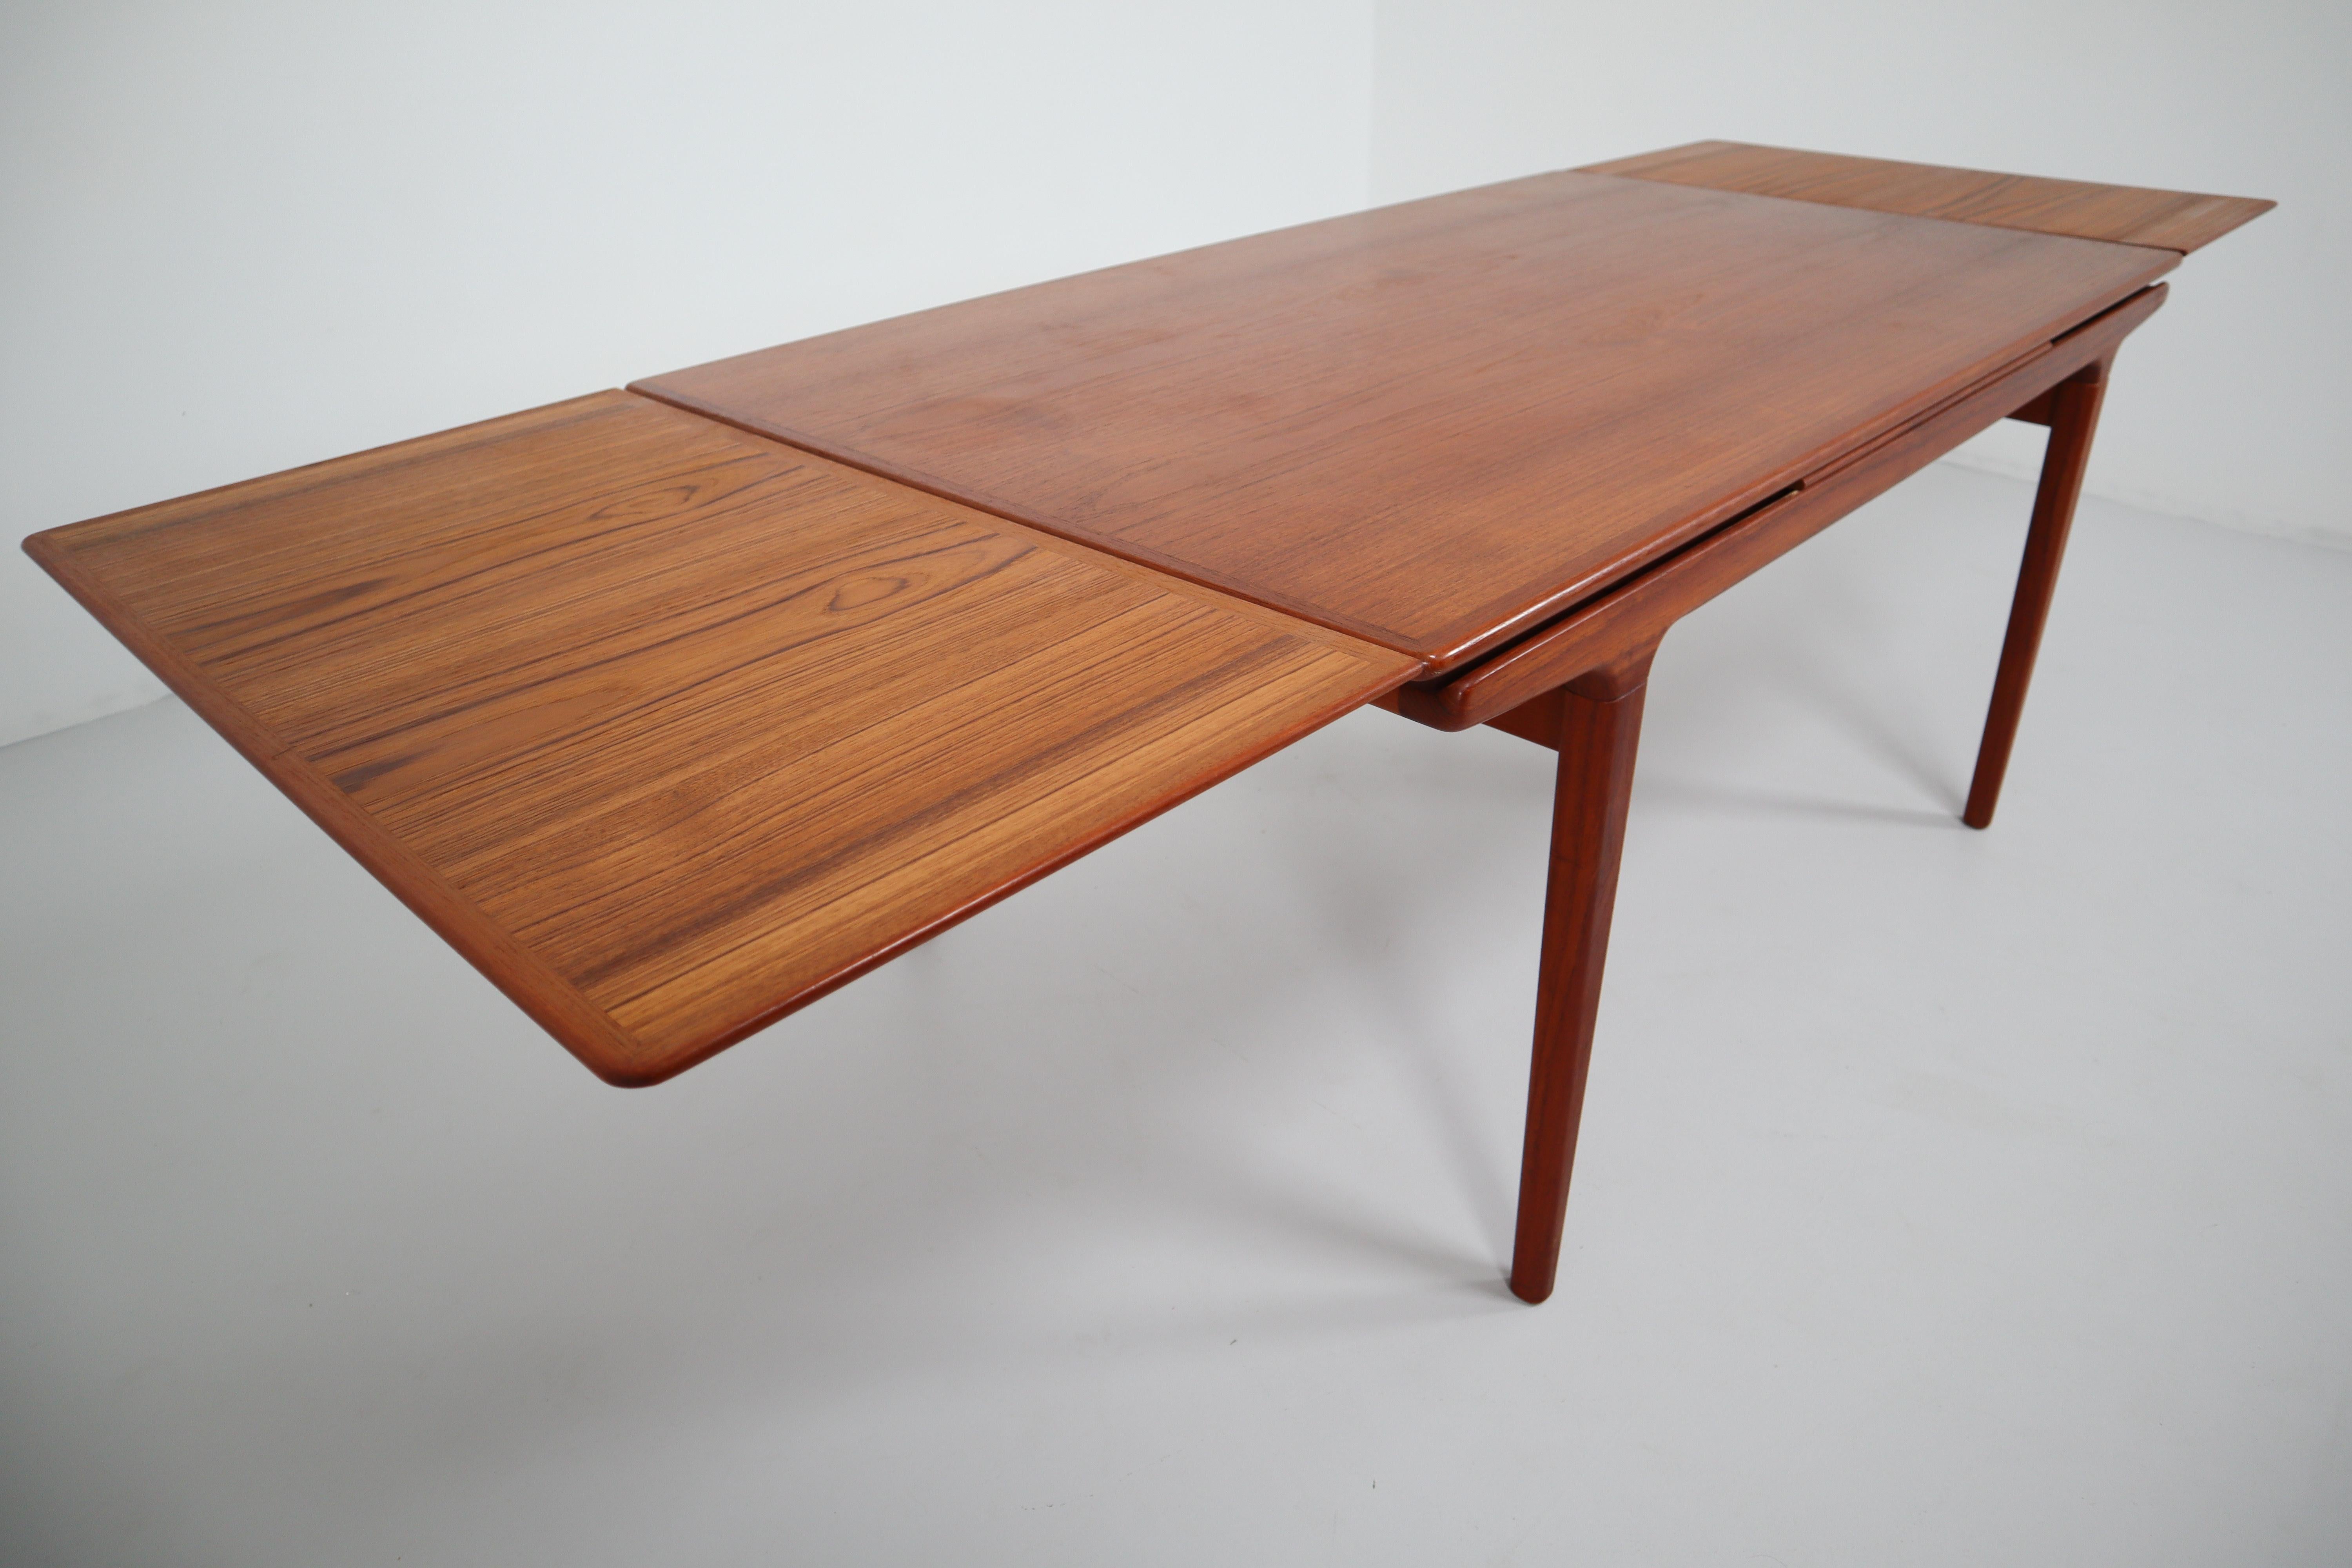 Designed by Niels Møller, this Danish modern extension table is notable for its beautifully tapered lines and the warmth of the teak. Two concealed leaves easily slide out allow ten persons to dine comfortably. Each extension is 50 cm.